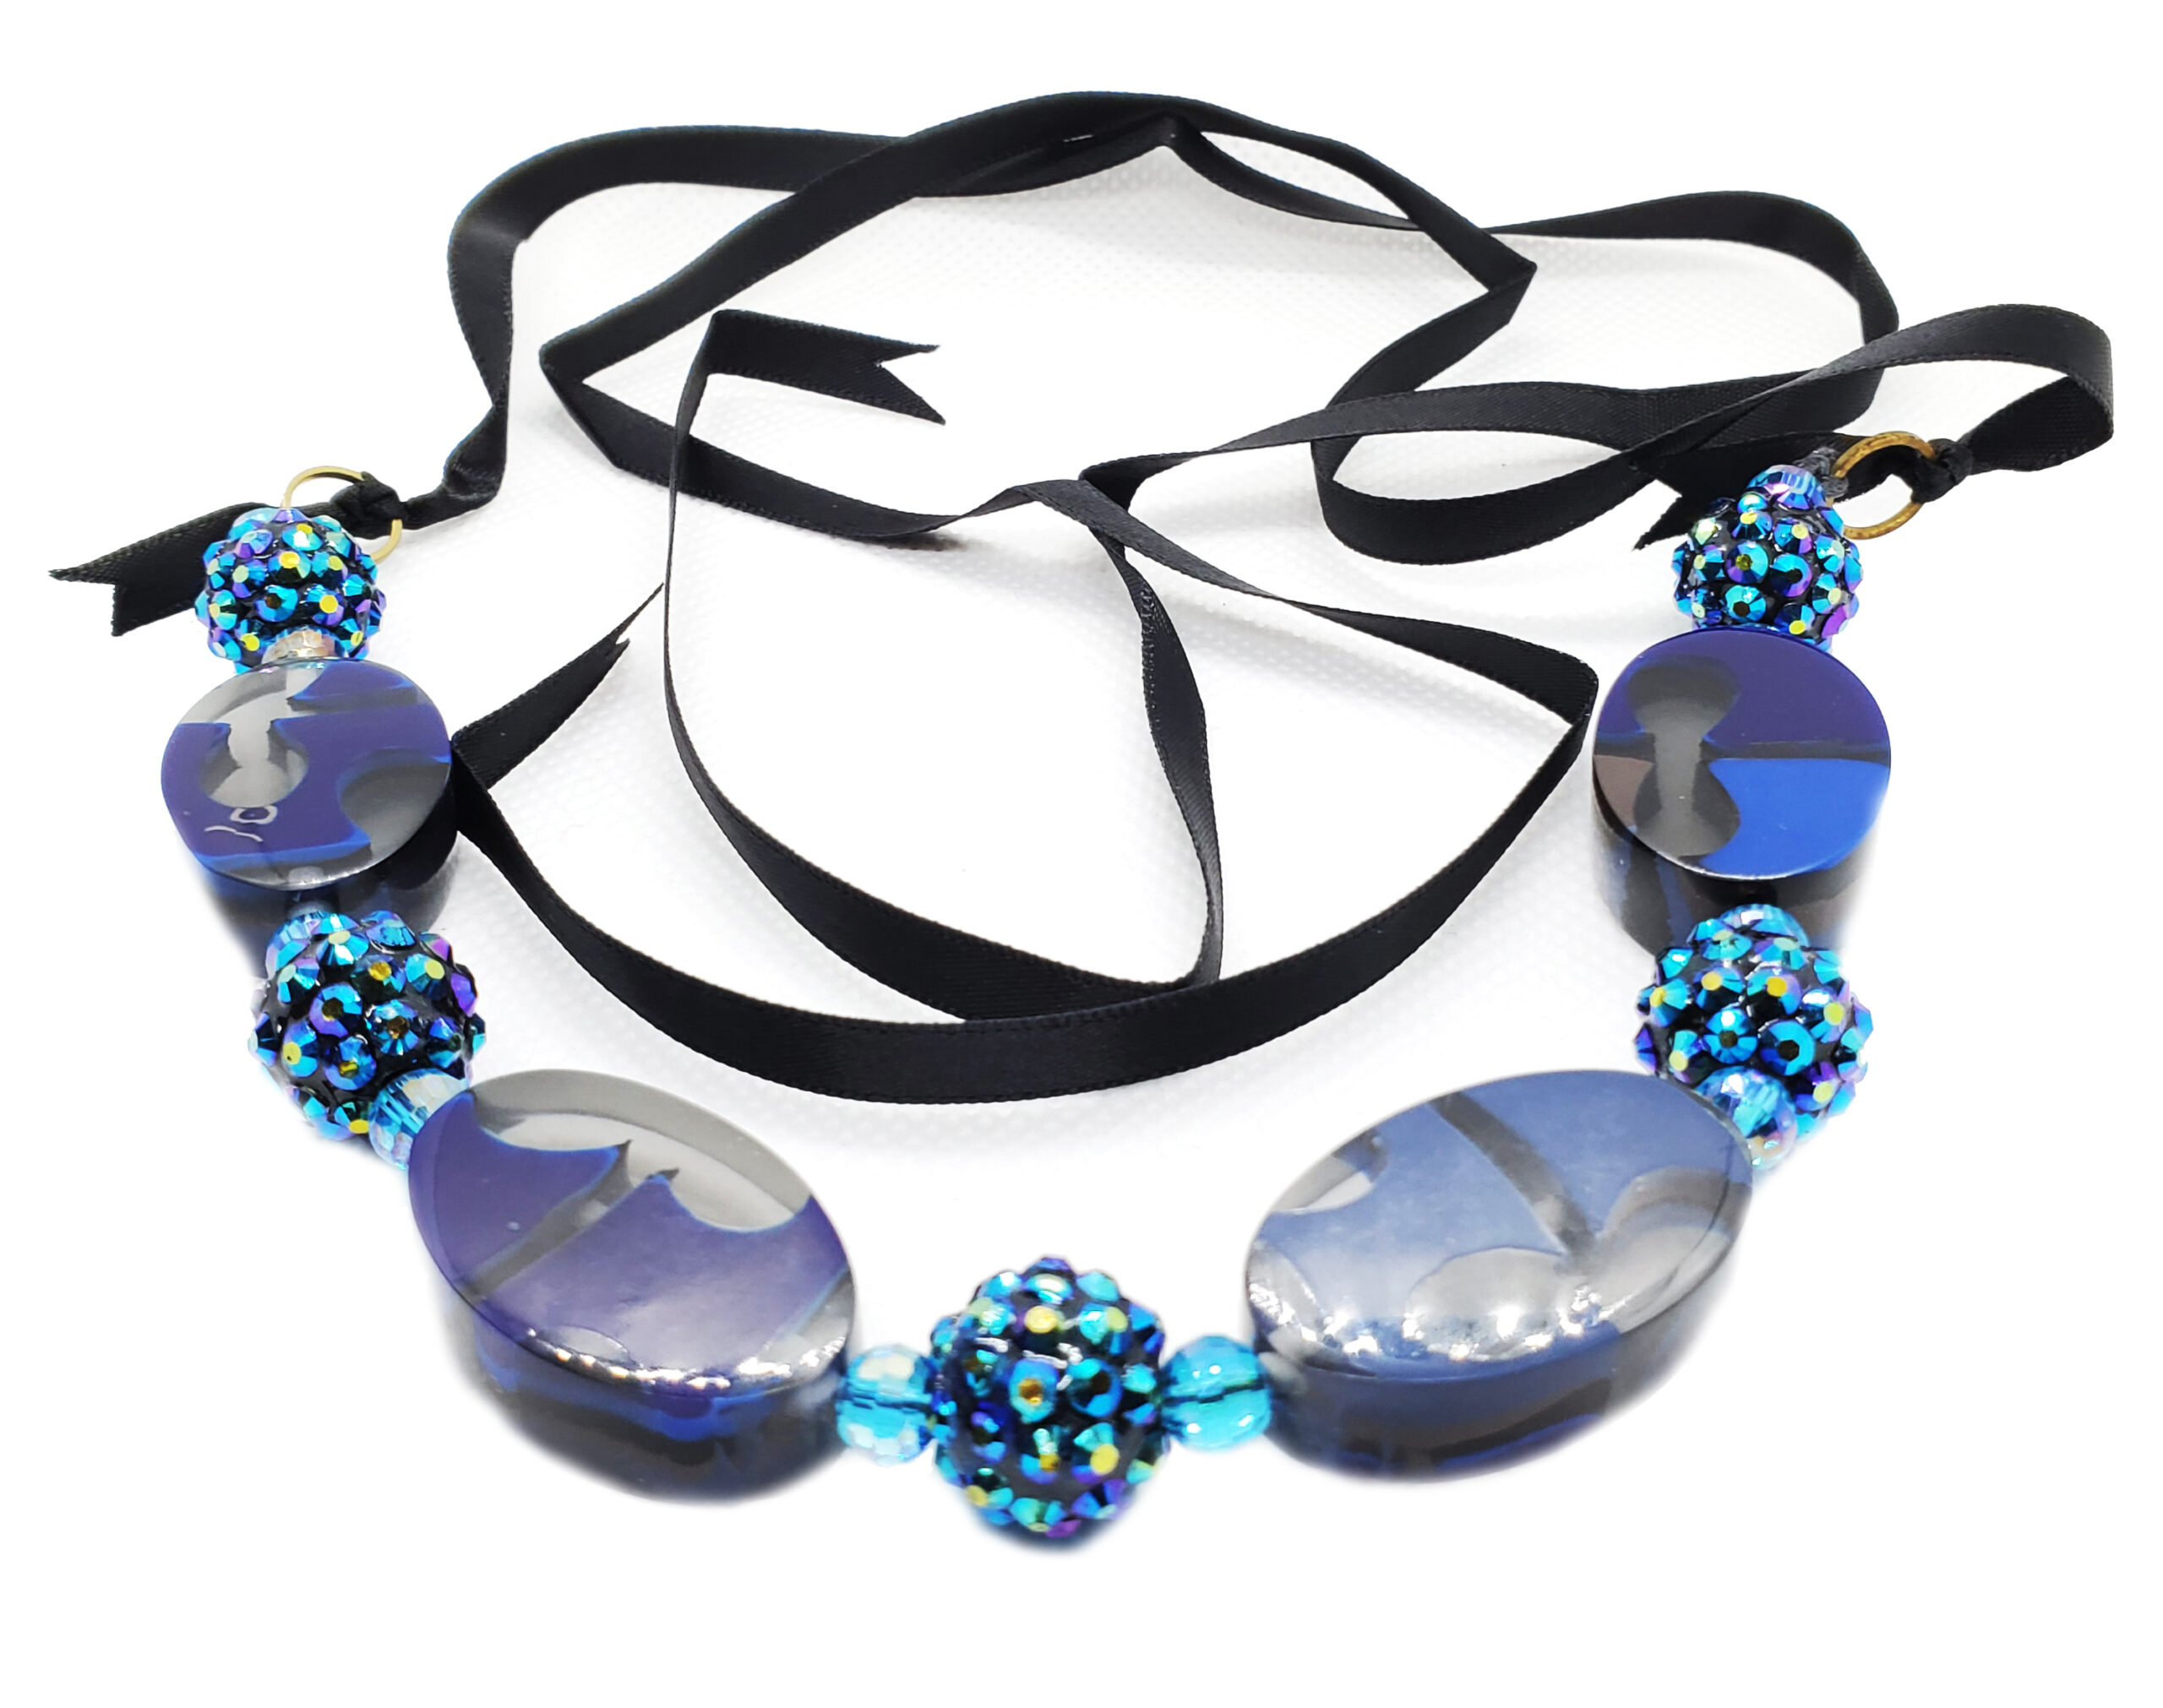 MPM PLAZA - BEAUTIFUL MULTICOLORED BEADED NECKLACES-NECKLACE FOR WOMEN – RRP £20.99 NOW £10.99